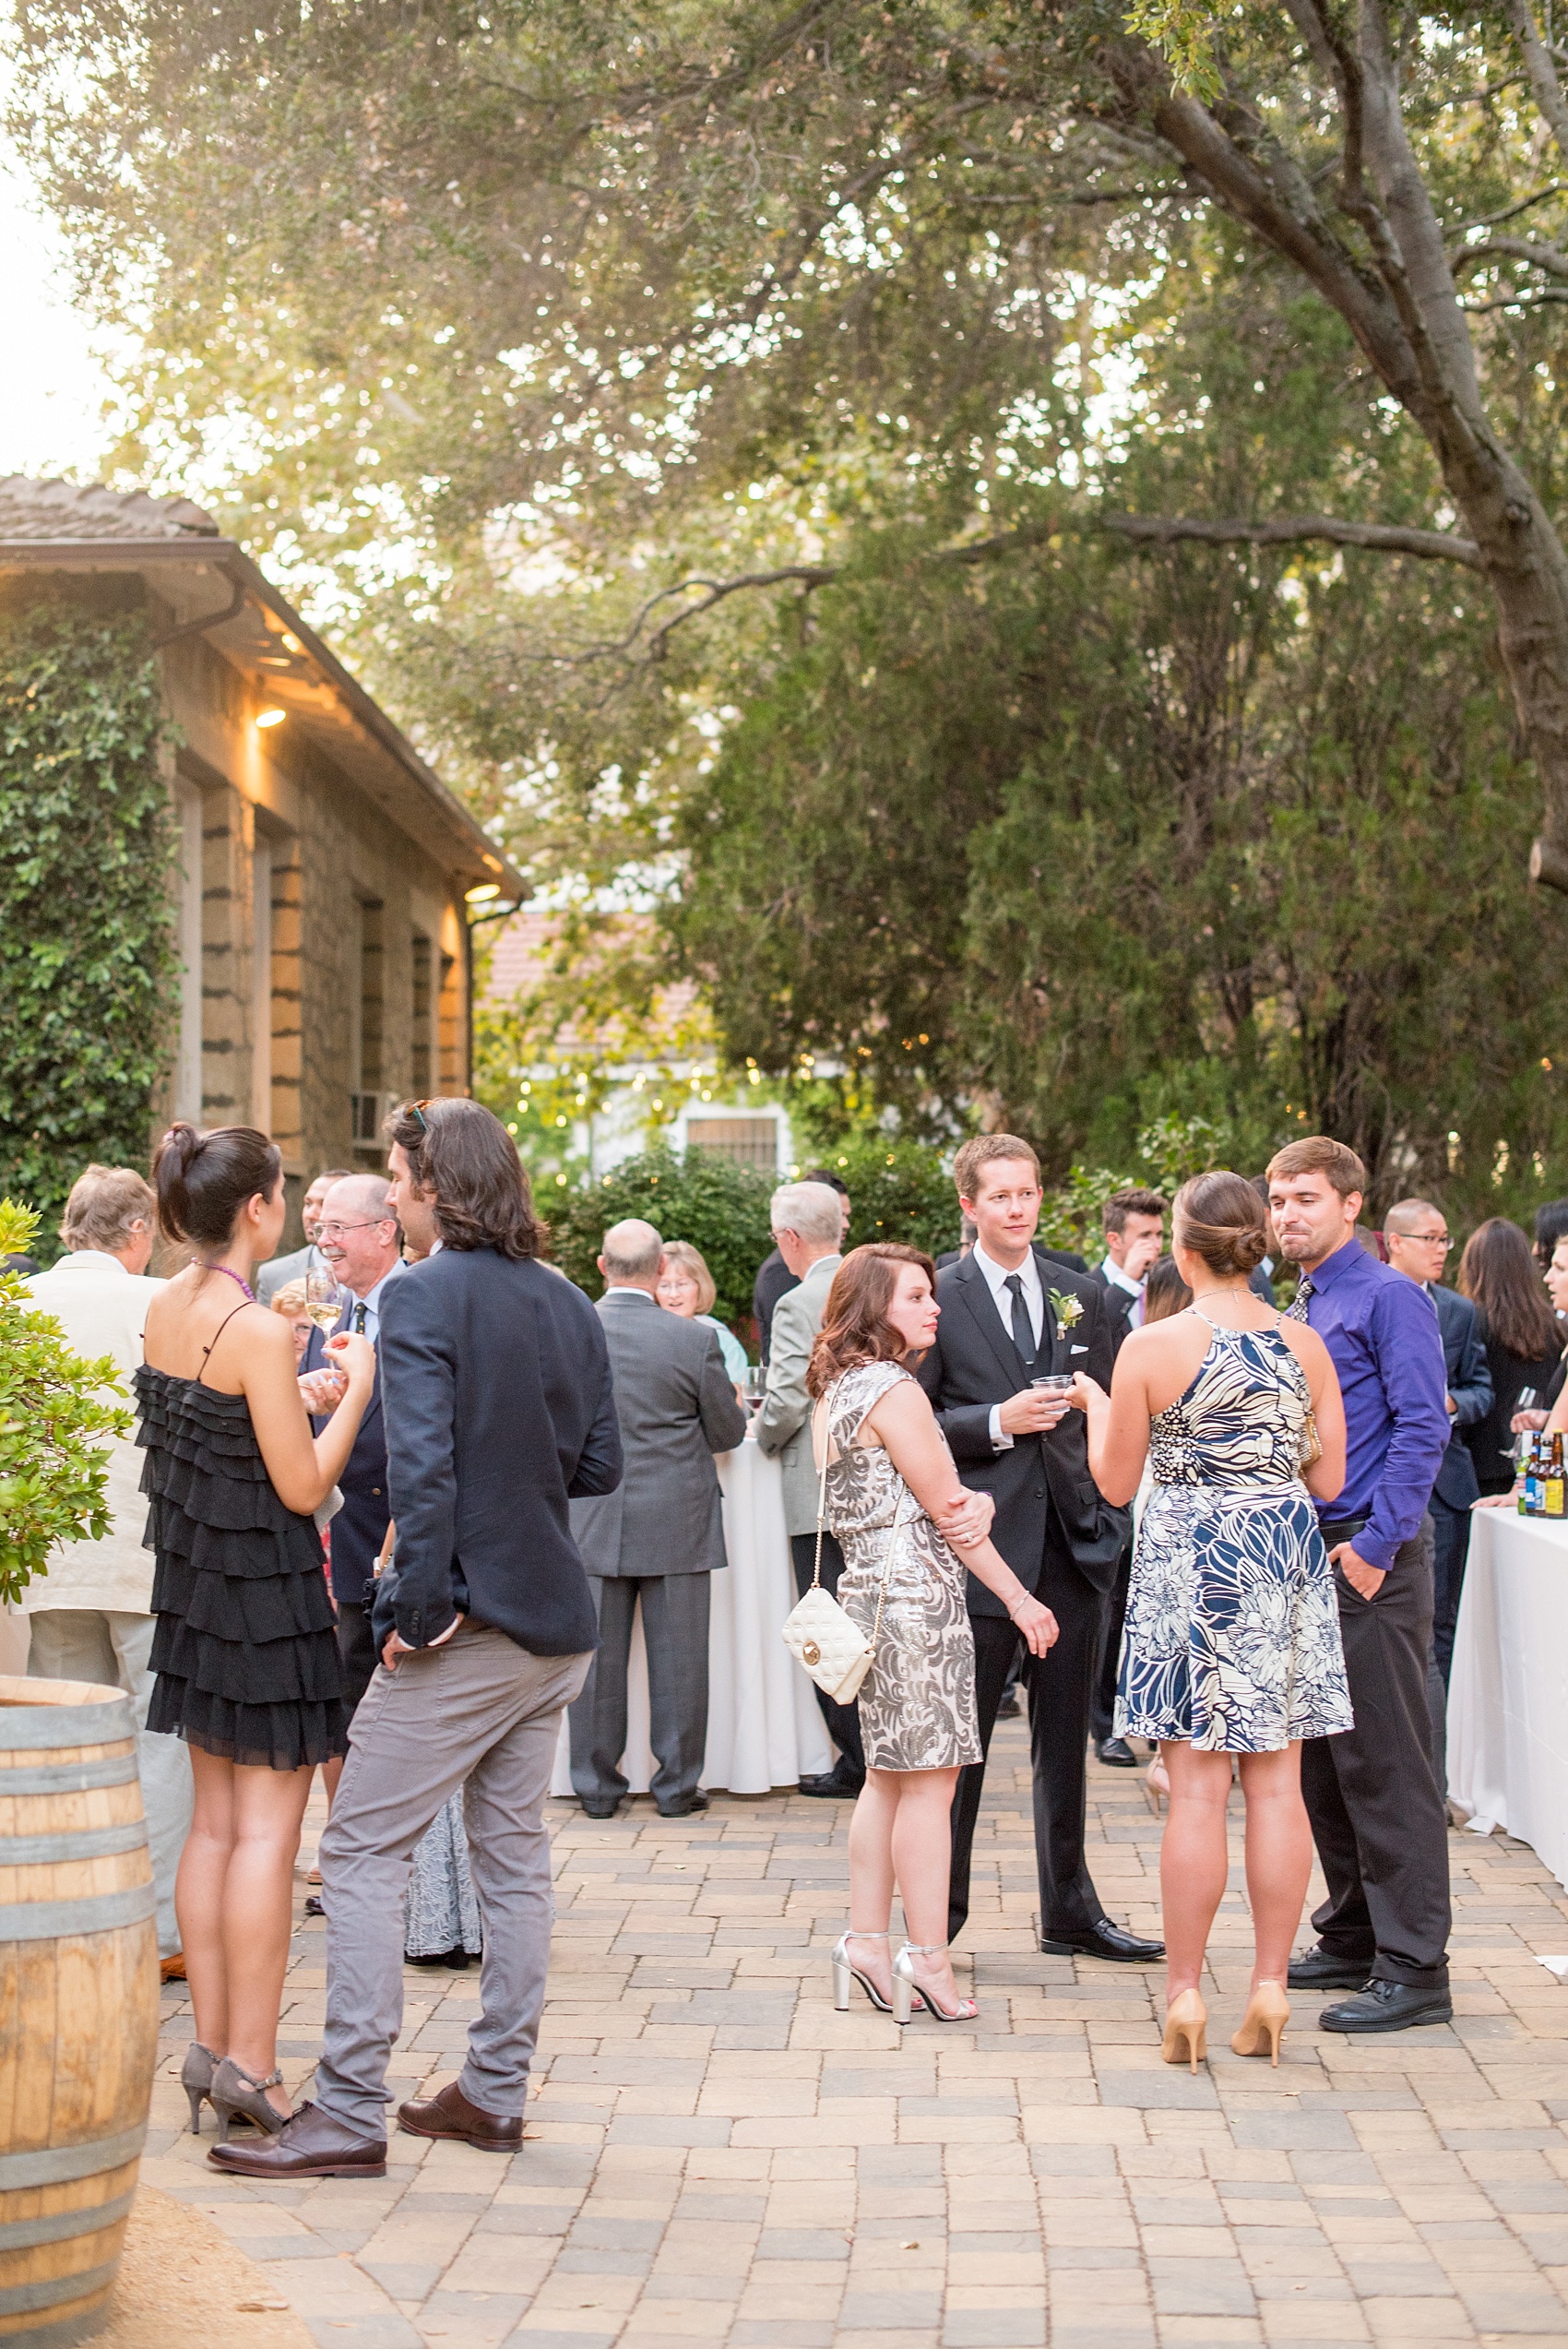 Mikkel Paige Photography photos of a wedding at Testarossa Winery in Los Gatos, California.